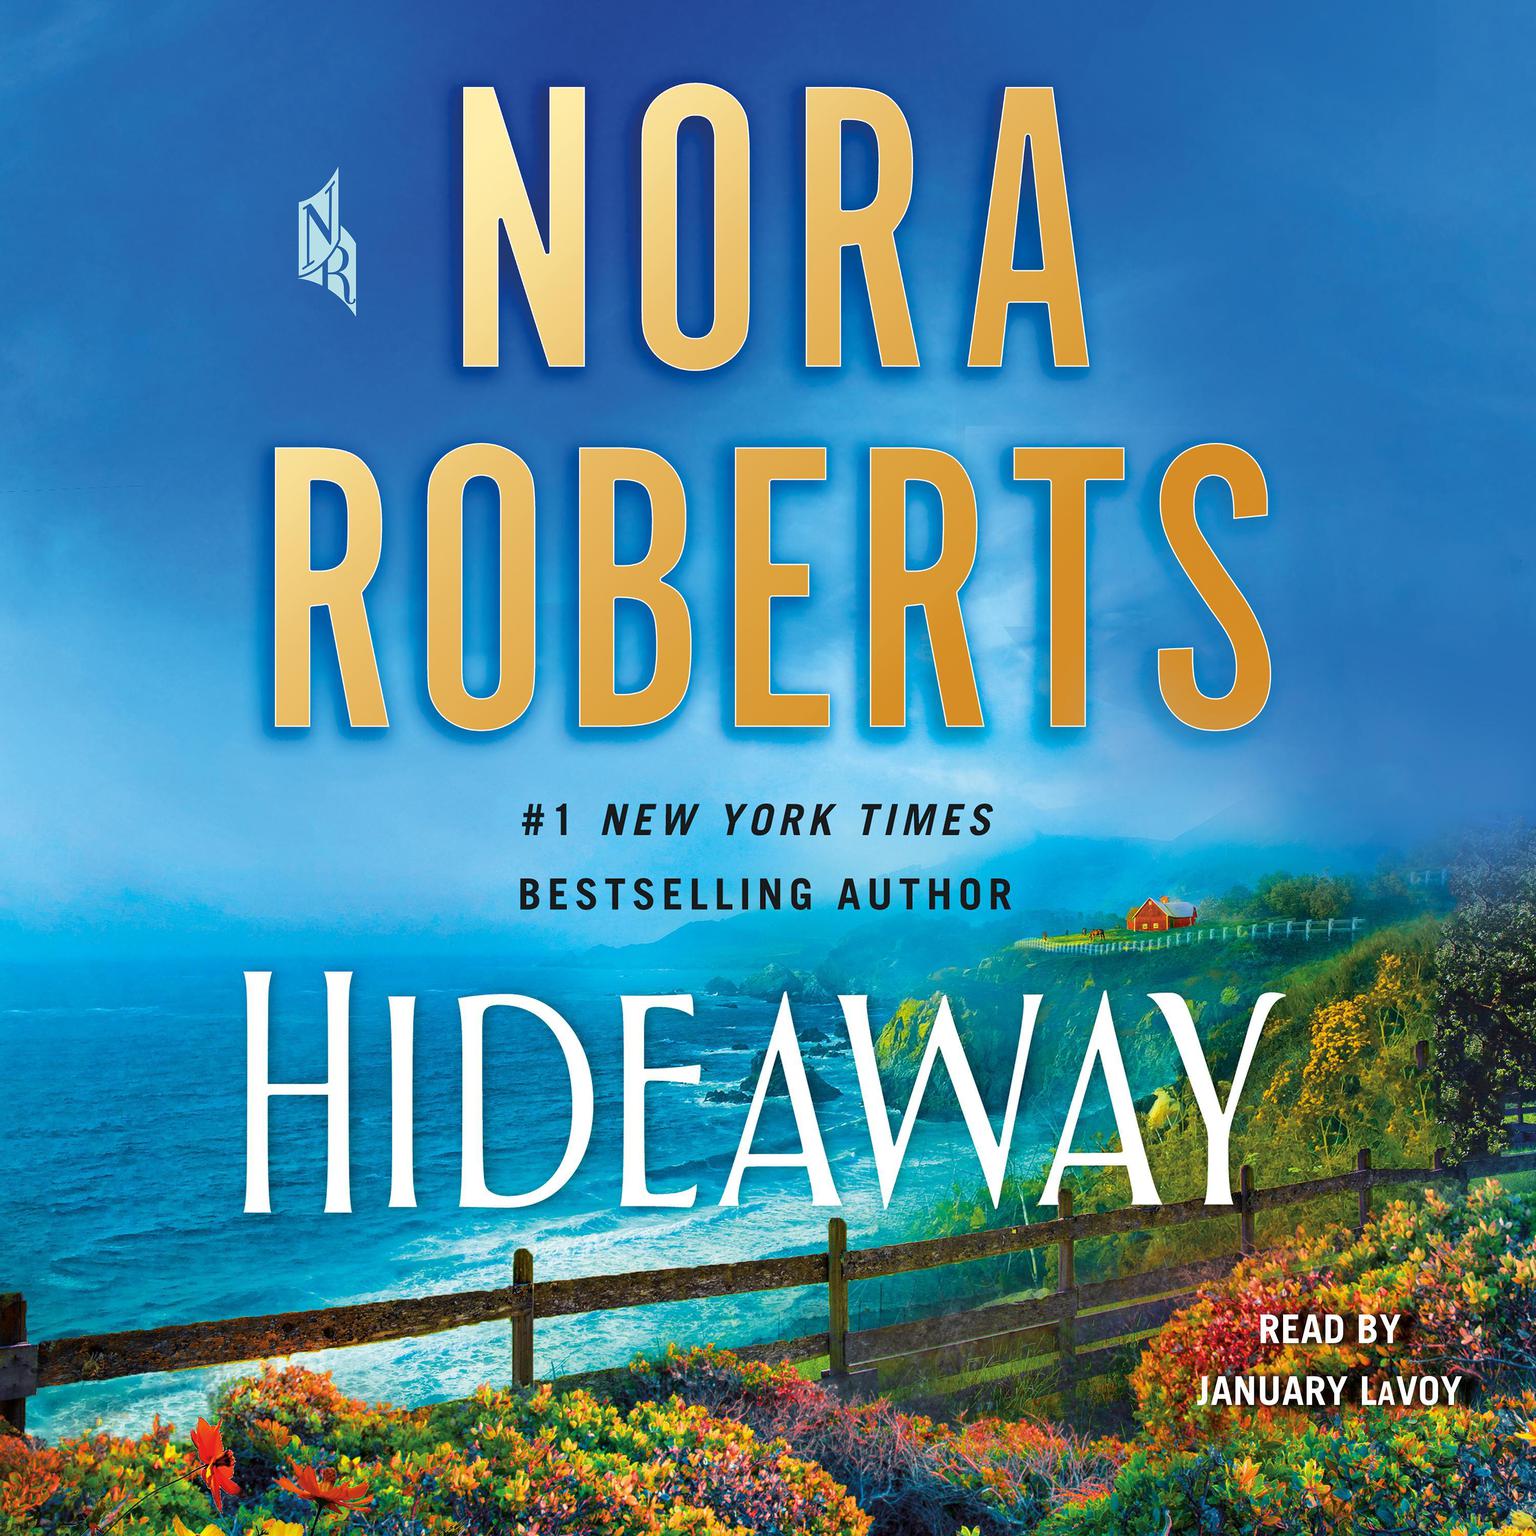 Hideaway: A Novel Audiobook, by Nora Roberts